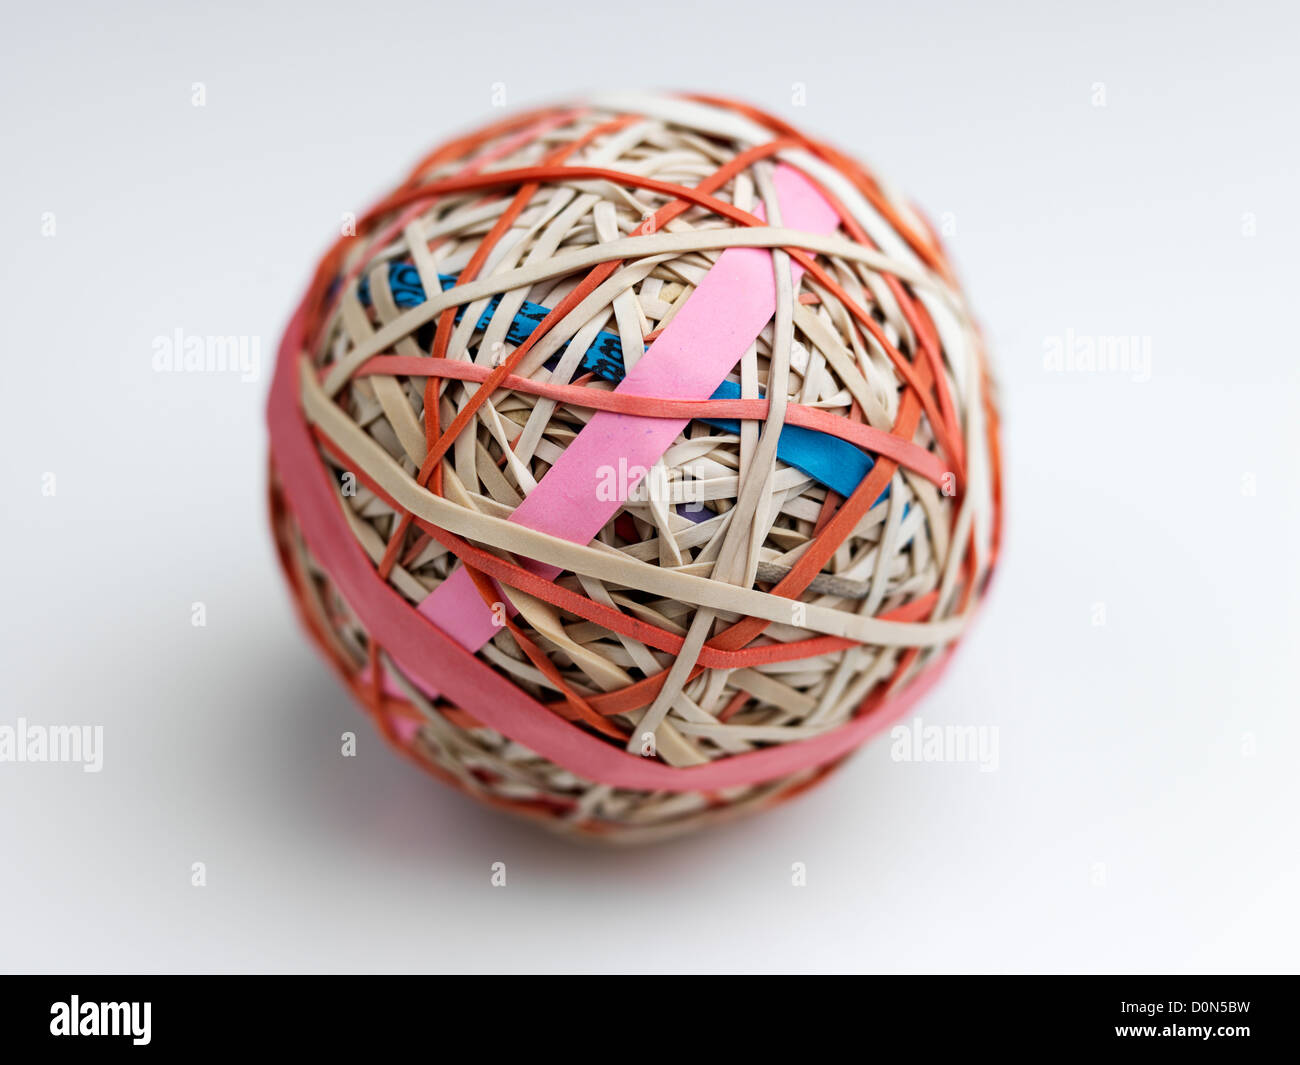 rubber band ball, ball made up of rubber bands wound over each other Stock Photo